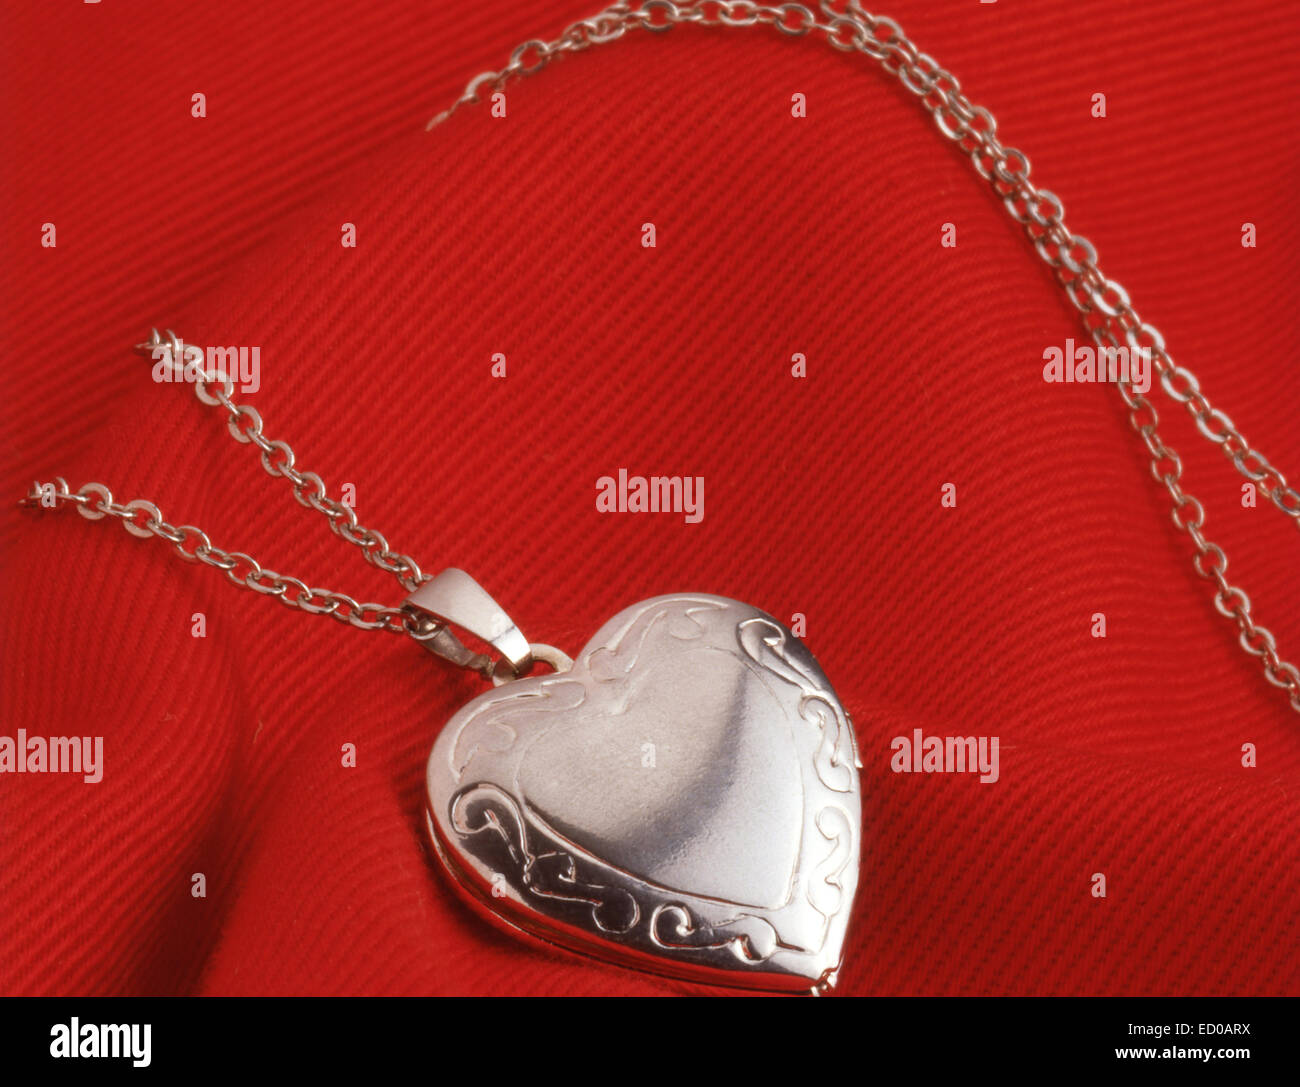 Ladies silver locket on chain against red material. Stock Photo